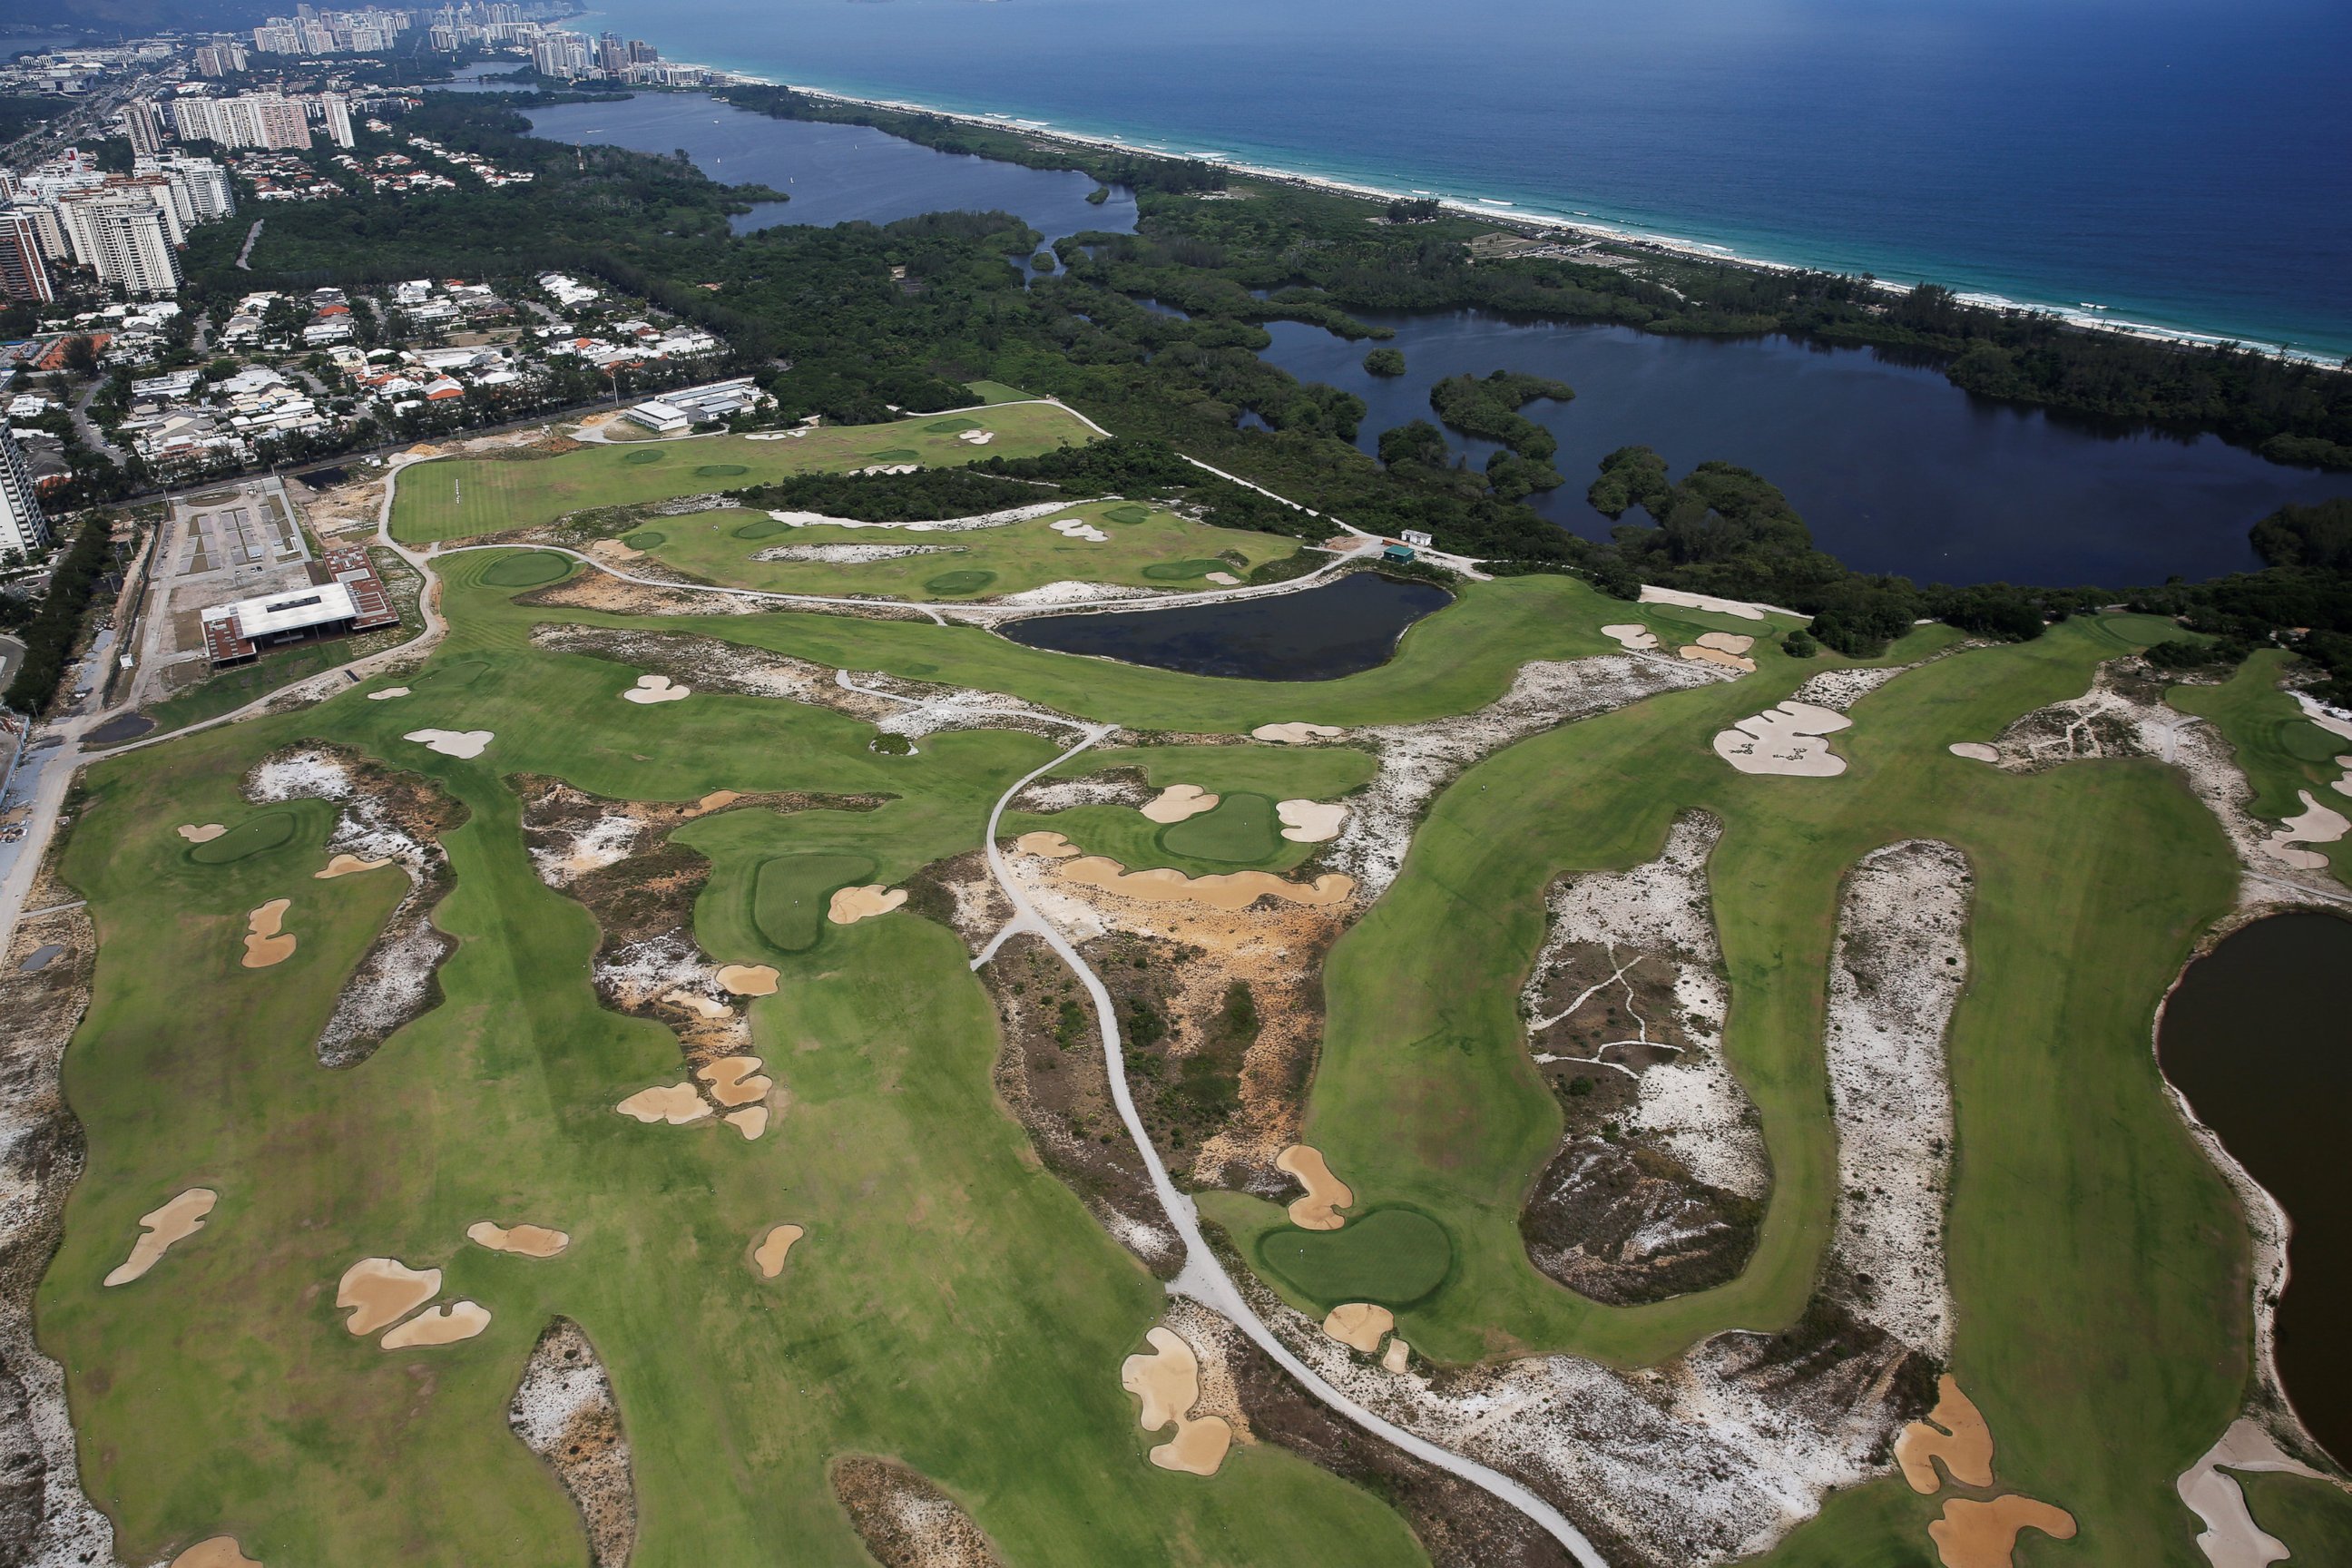 PHOTO: An aerial view shows the 2016 Rio Olympics golf venue which was used for the Rio 2016 Olympic Games, in Rio de Janeiro, Brazil, Jan. 15, 2017.